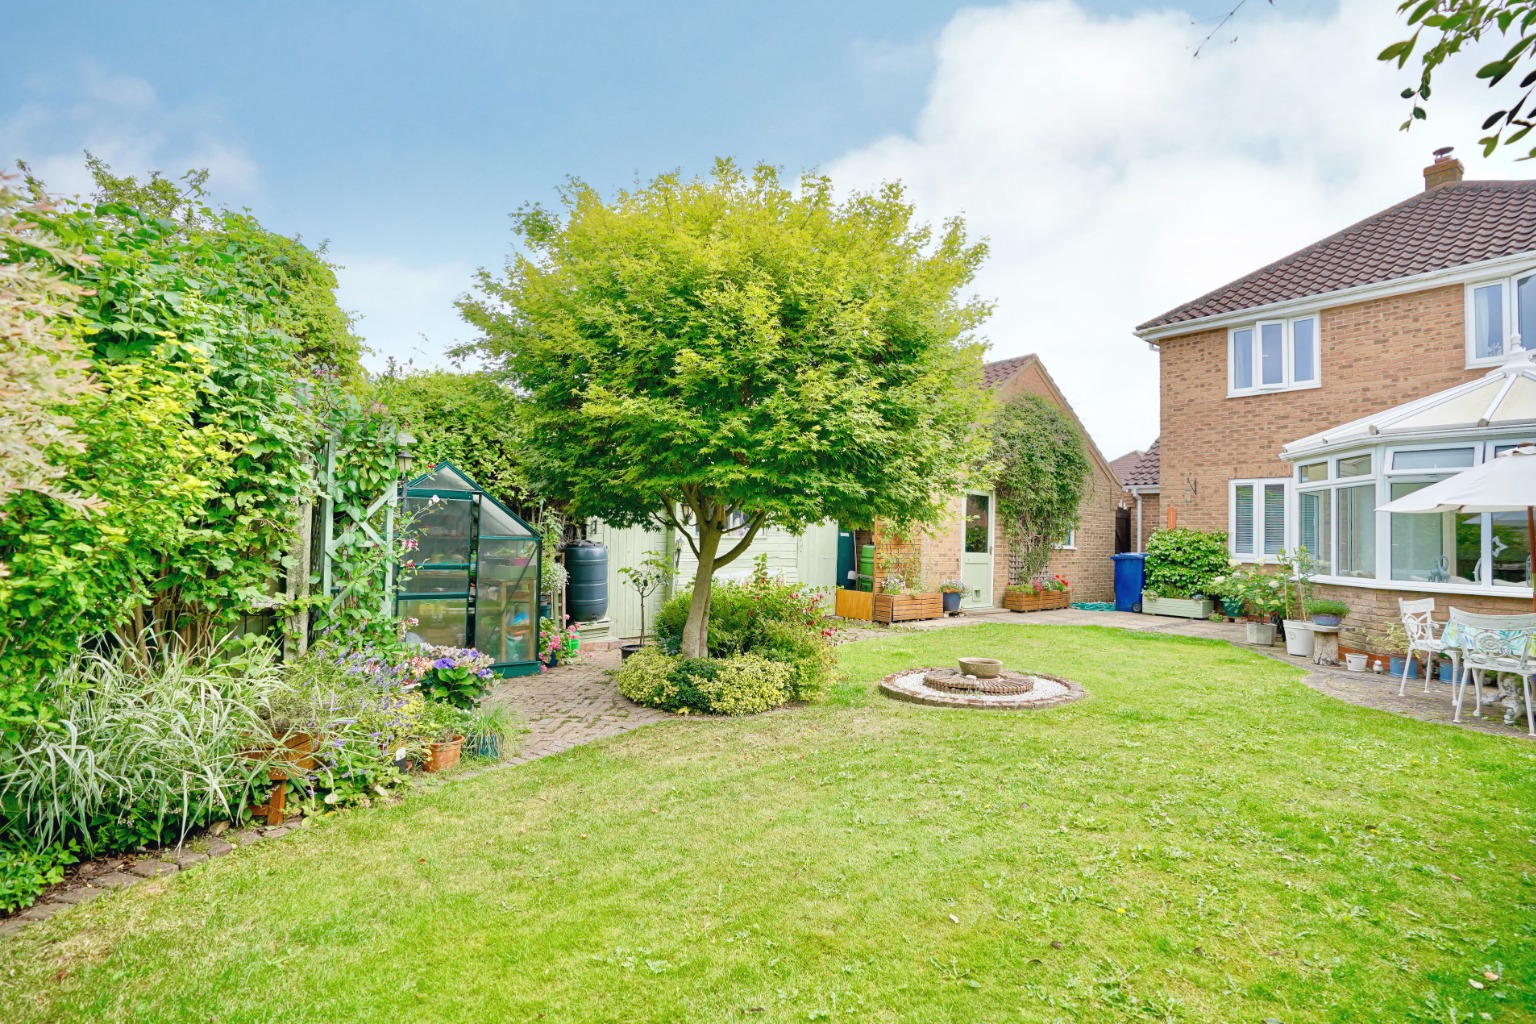 4 bed detached house for sale in Alsyke Close, Huntingdon  - Property Image 1